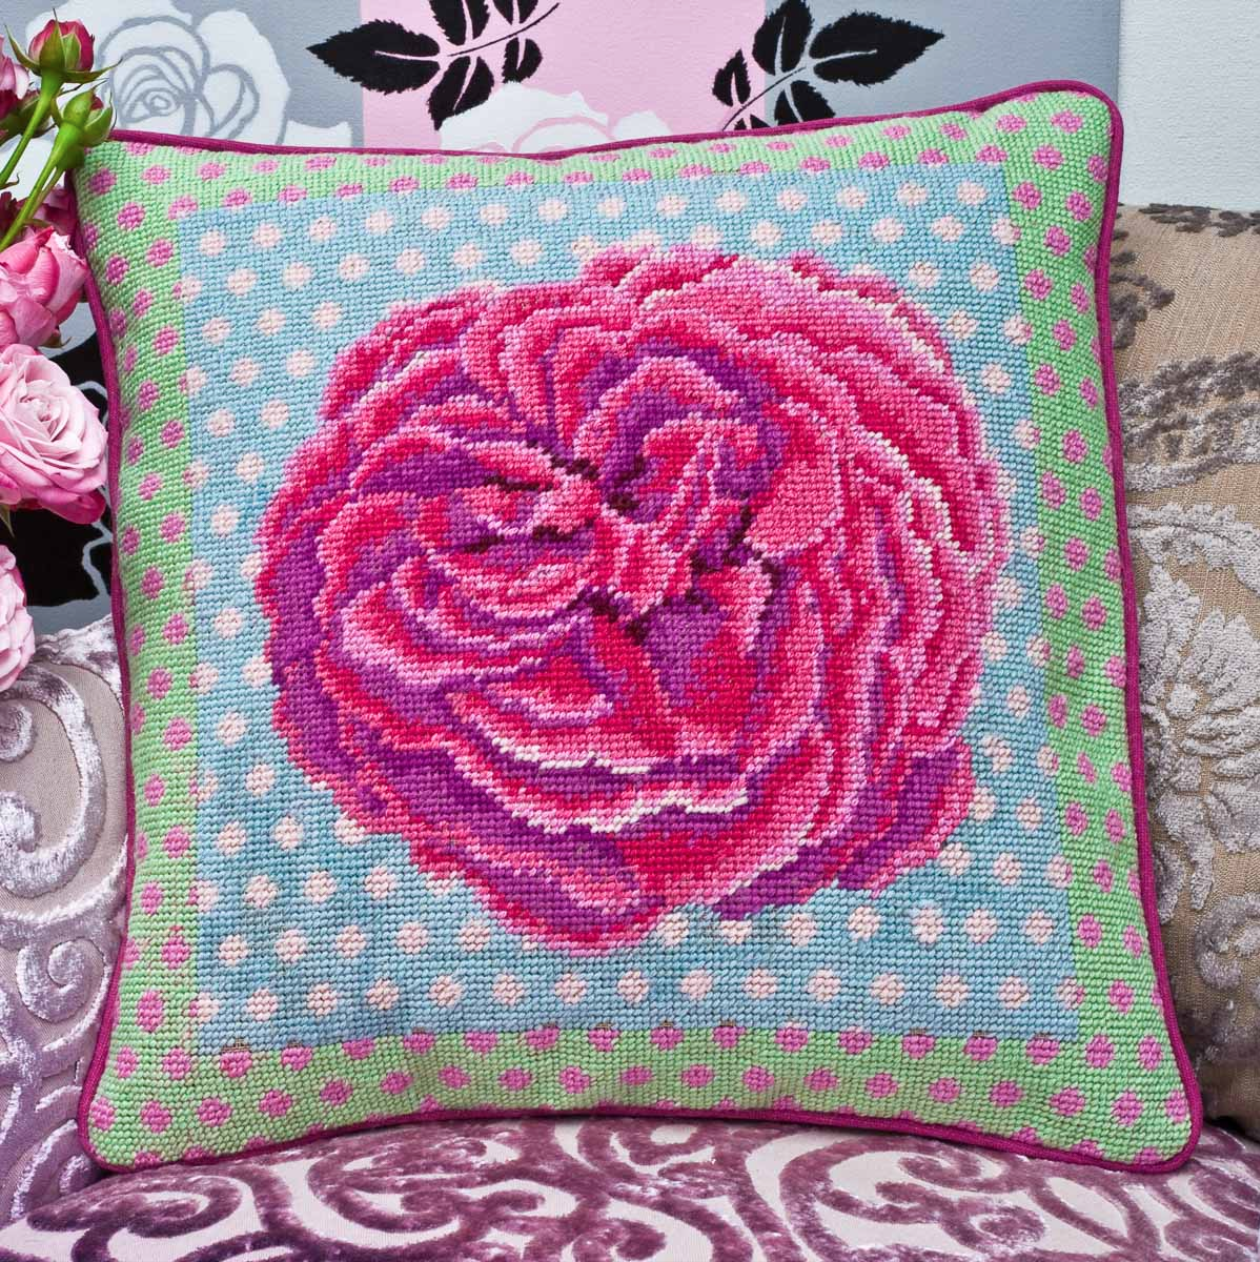 Bright rose bloom needlepoint cushion kit designed by Kaffe Fassett and sold by Erhman Tapestry